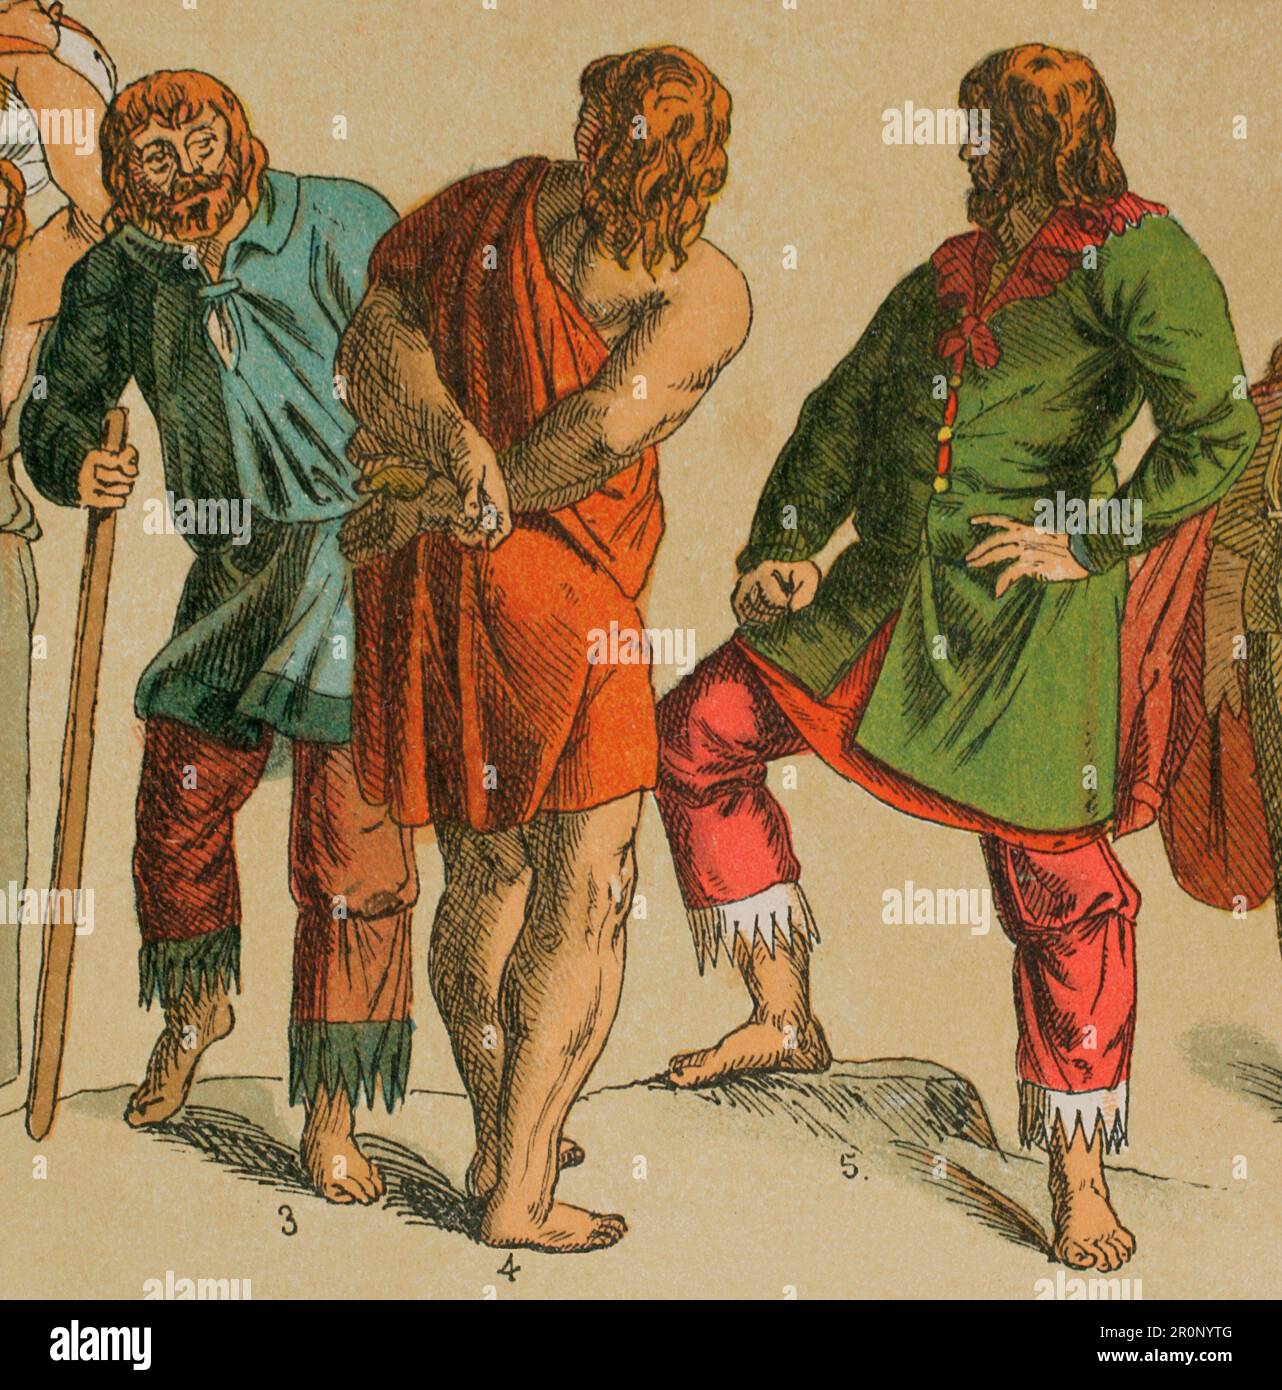 Germanic peoples. Goths. From left to right: 3- Eastern Goth costume, 4- Goth costume (chiton, poor people's clothing), 5- Eastern Goth costume, garnished pants. Chromolithography. 'Historia Universal', by César Cantú. Volume III, 1882. Stock Photo